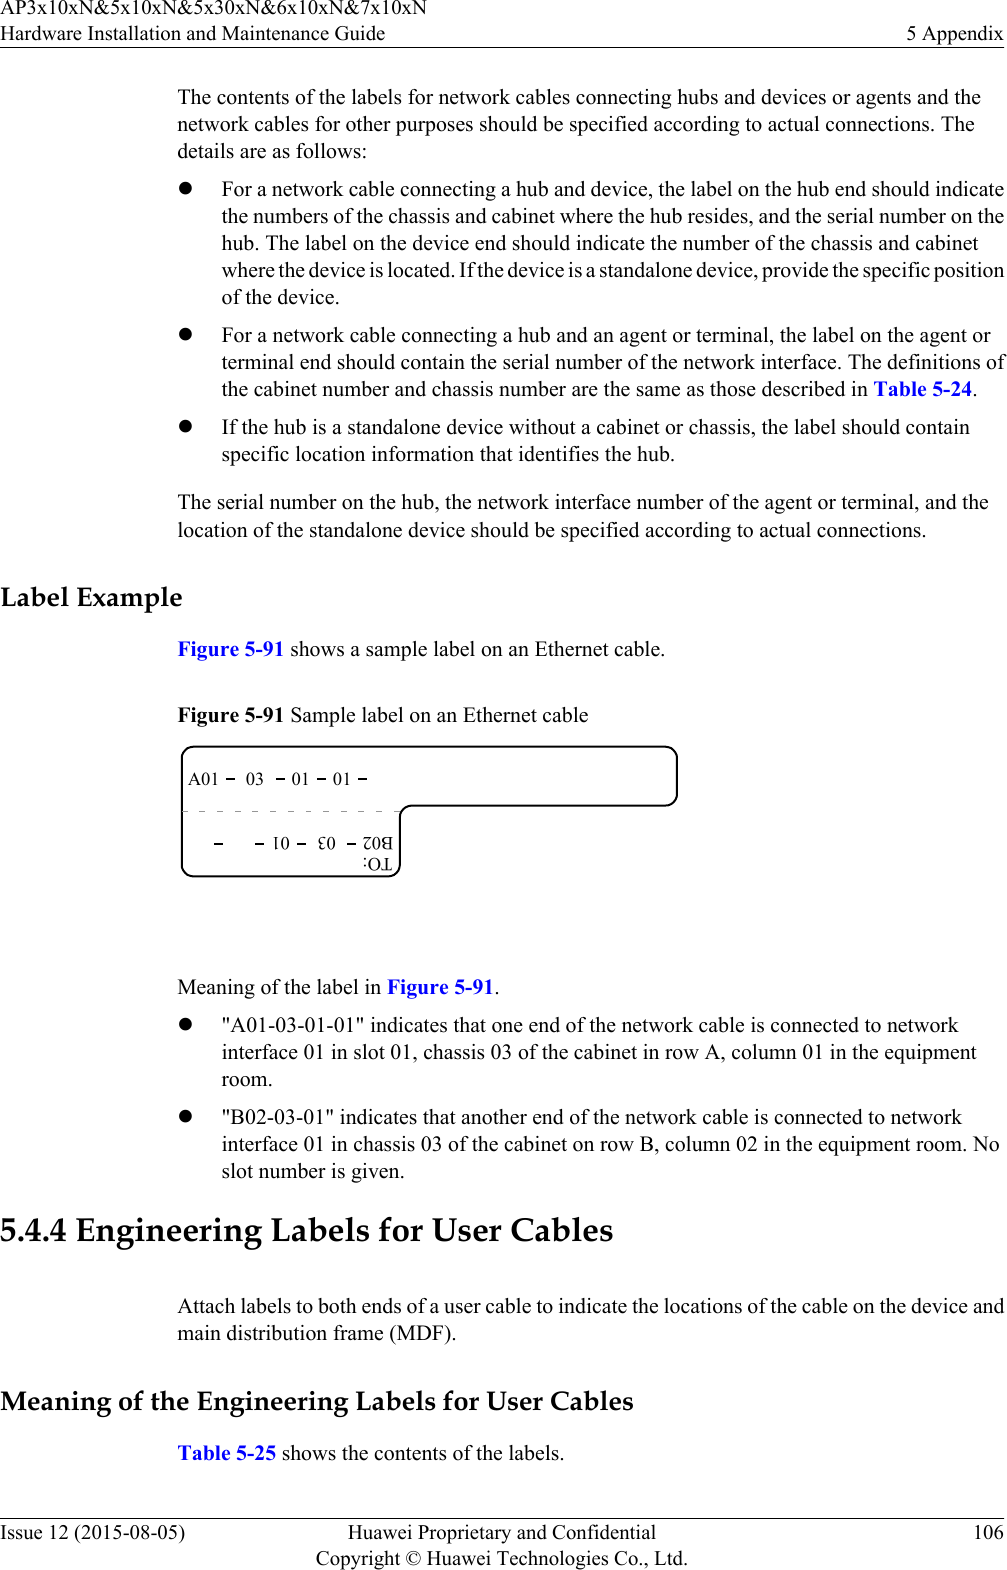 The contents of the labels for network cables connecting hubs and devices or agents and thenetwork cables for other purposes should be specified according to actual connections. Thedetails are as follows:lFor a network cable connecting a hub and device, the label on the hub end should indicatethe numbers of the chassis and cabinet where the hub resides, and the serial number on thehub. The label on the device end should indicate the number of the chassis and cabinetwhere the device is located. If the device is a standalone device, provide the specific positionof the device.lFor a network cable connecting a hub and an agent or terminal, the label on the agent orterminal end should contain the serial number of the network interface. The definitions ofthe cabinet number and chassis number are the same as those described in Table 5-24.lIf the hub is a standalone device without a cabinet or chassis, the label should containspecific location information that identifies the hub.The serial number on the hub, the network interface number of the agent or terminal, and thelocation of the standalone device should be specified according to actual connections.Label ExampleFigure 5-91 shows a sample label on an Ethernet cable.Figure 5-91 Sample label on an Ethernet cableA01TO:03 01 01B02 03 01 Meaning of the label in Figure 5-91.l&quot;A01-03-01-01&quot; indicates that one end of the network cable is connected to networkinterface 01 in slot 01, chassis 03 of the cabinet in row A, column 01 in the equipmentroom.l&quot;B02-03-01&quot; indicates that another end of the network cable is connected to networkinterface 01 in chassis 03 of the cabinet on row B, column 02 in the equipment room. Noslot number is given.5.4.4 Engineering Labels for User CablesAttach labels to both ends of a user cable to indicate the locations of the cable on the device andmain distribution frame (MDF).Meaning of the Engineering Labels for User CablesTable 5-25 shows the contents of the labels.AP3x10xN&amp;5x10xN&amp;5x30xN&amp;6x10xN&amp;7x10xNHardware Installation and Maintenance Guide 5 AppendixIssue 12 (2015-08-05) Huawei Proprietary and ConfidentialCopyright © Huawei Technologies Co., Ltd.106